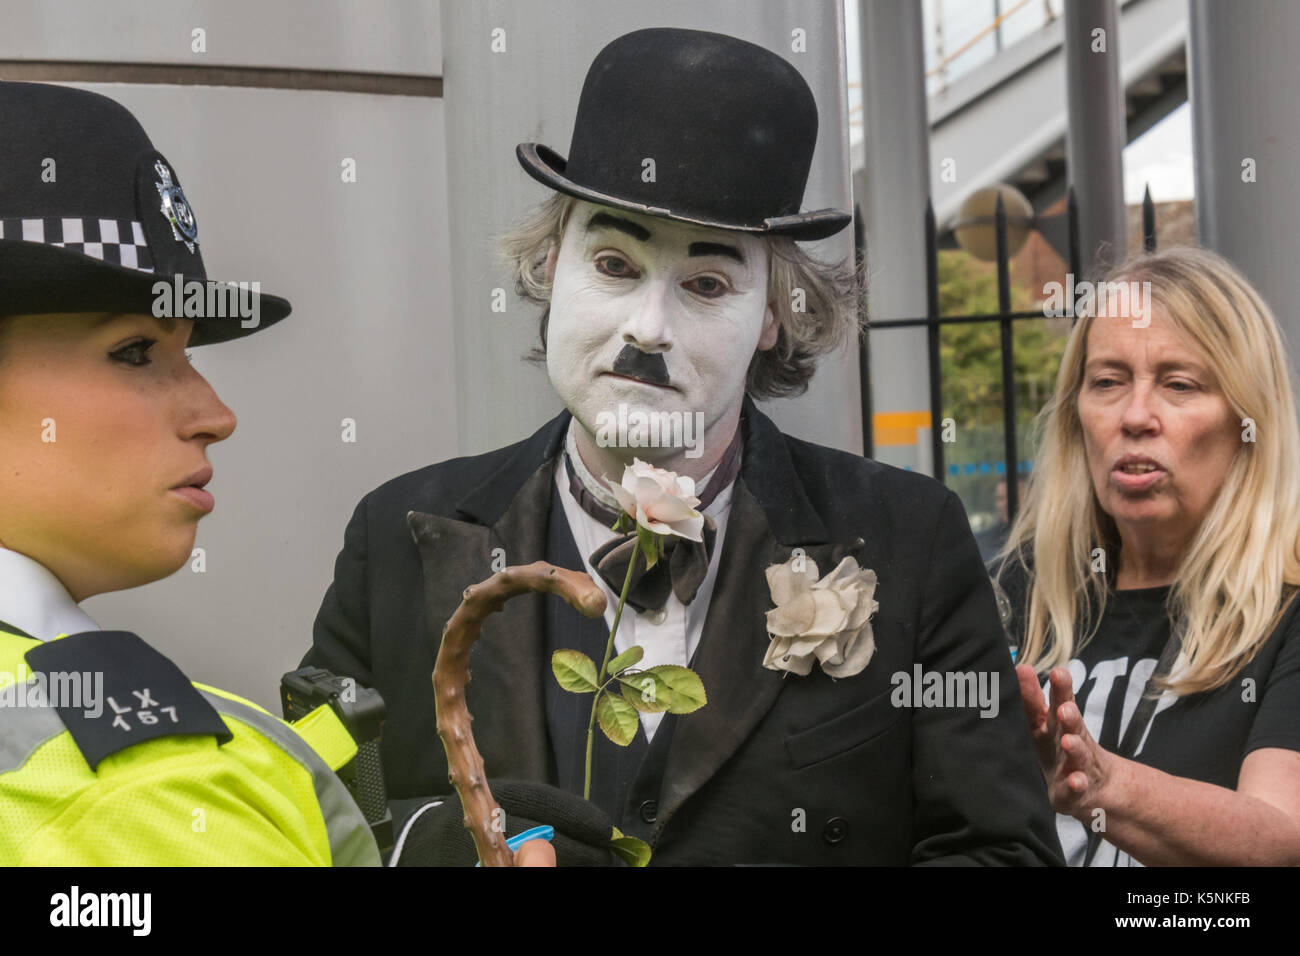 London, UK. 9th Sep, 2017. London, UK. 9th September 2017.Police arrest Charlie X, a Chaplin clone who tried to block a lorry at the West Gate of the DSEI arms fair, The Defence & Security Equipment International is the worlds largest arms fair, backed by the UK government, where arms companies and arms dealers sell weapons to countries around the world including many repressive regimes. Police at the West gate also inexplicably arrested a cyclist who was found to be in possession of a bike lock. Back at the East Gate there was a lock-on by two protesters stopping up a lorry and other p Stock Photo